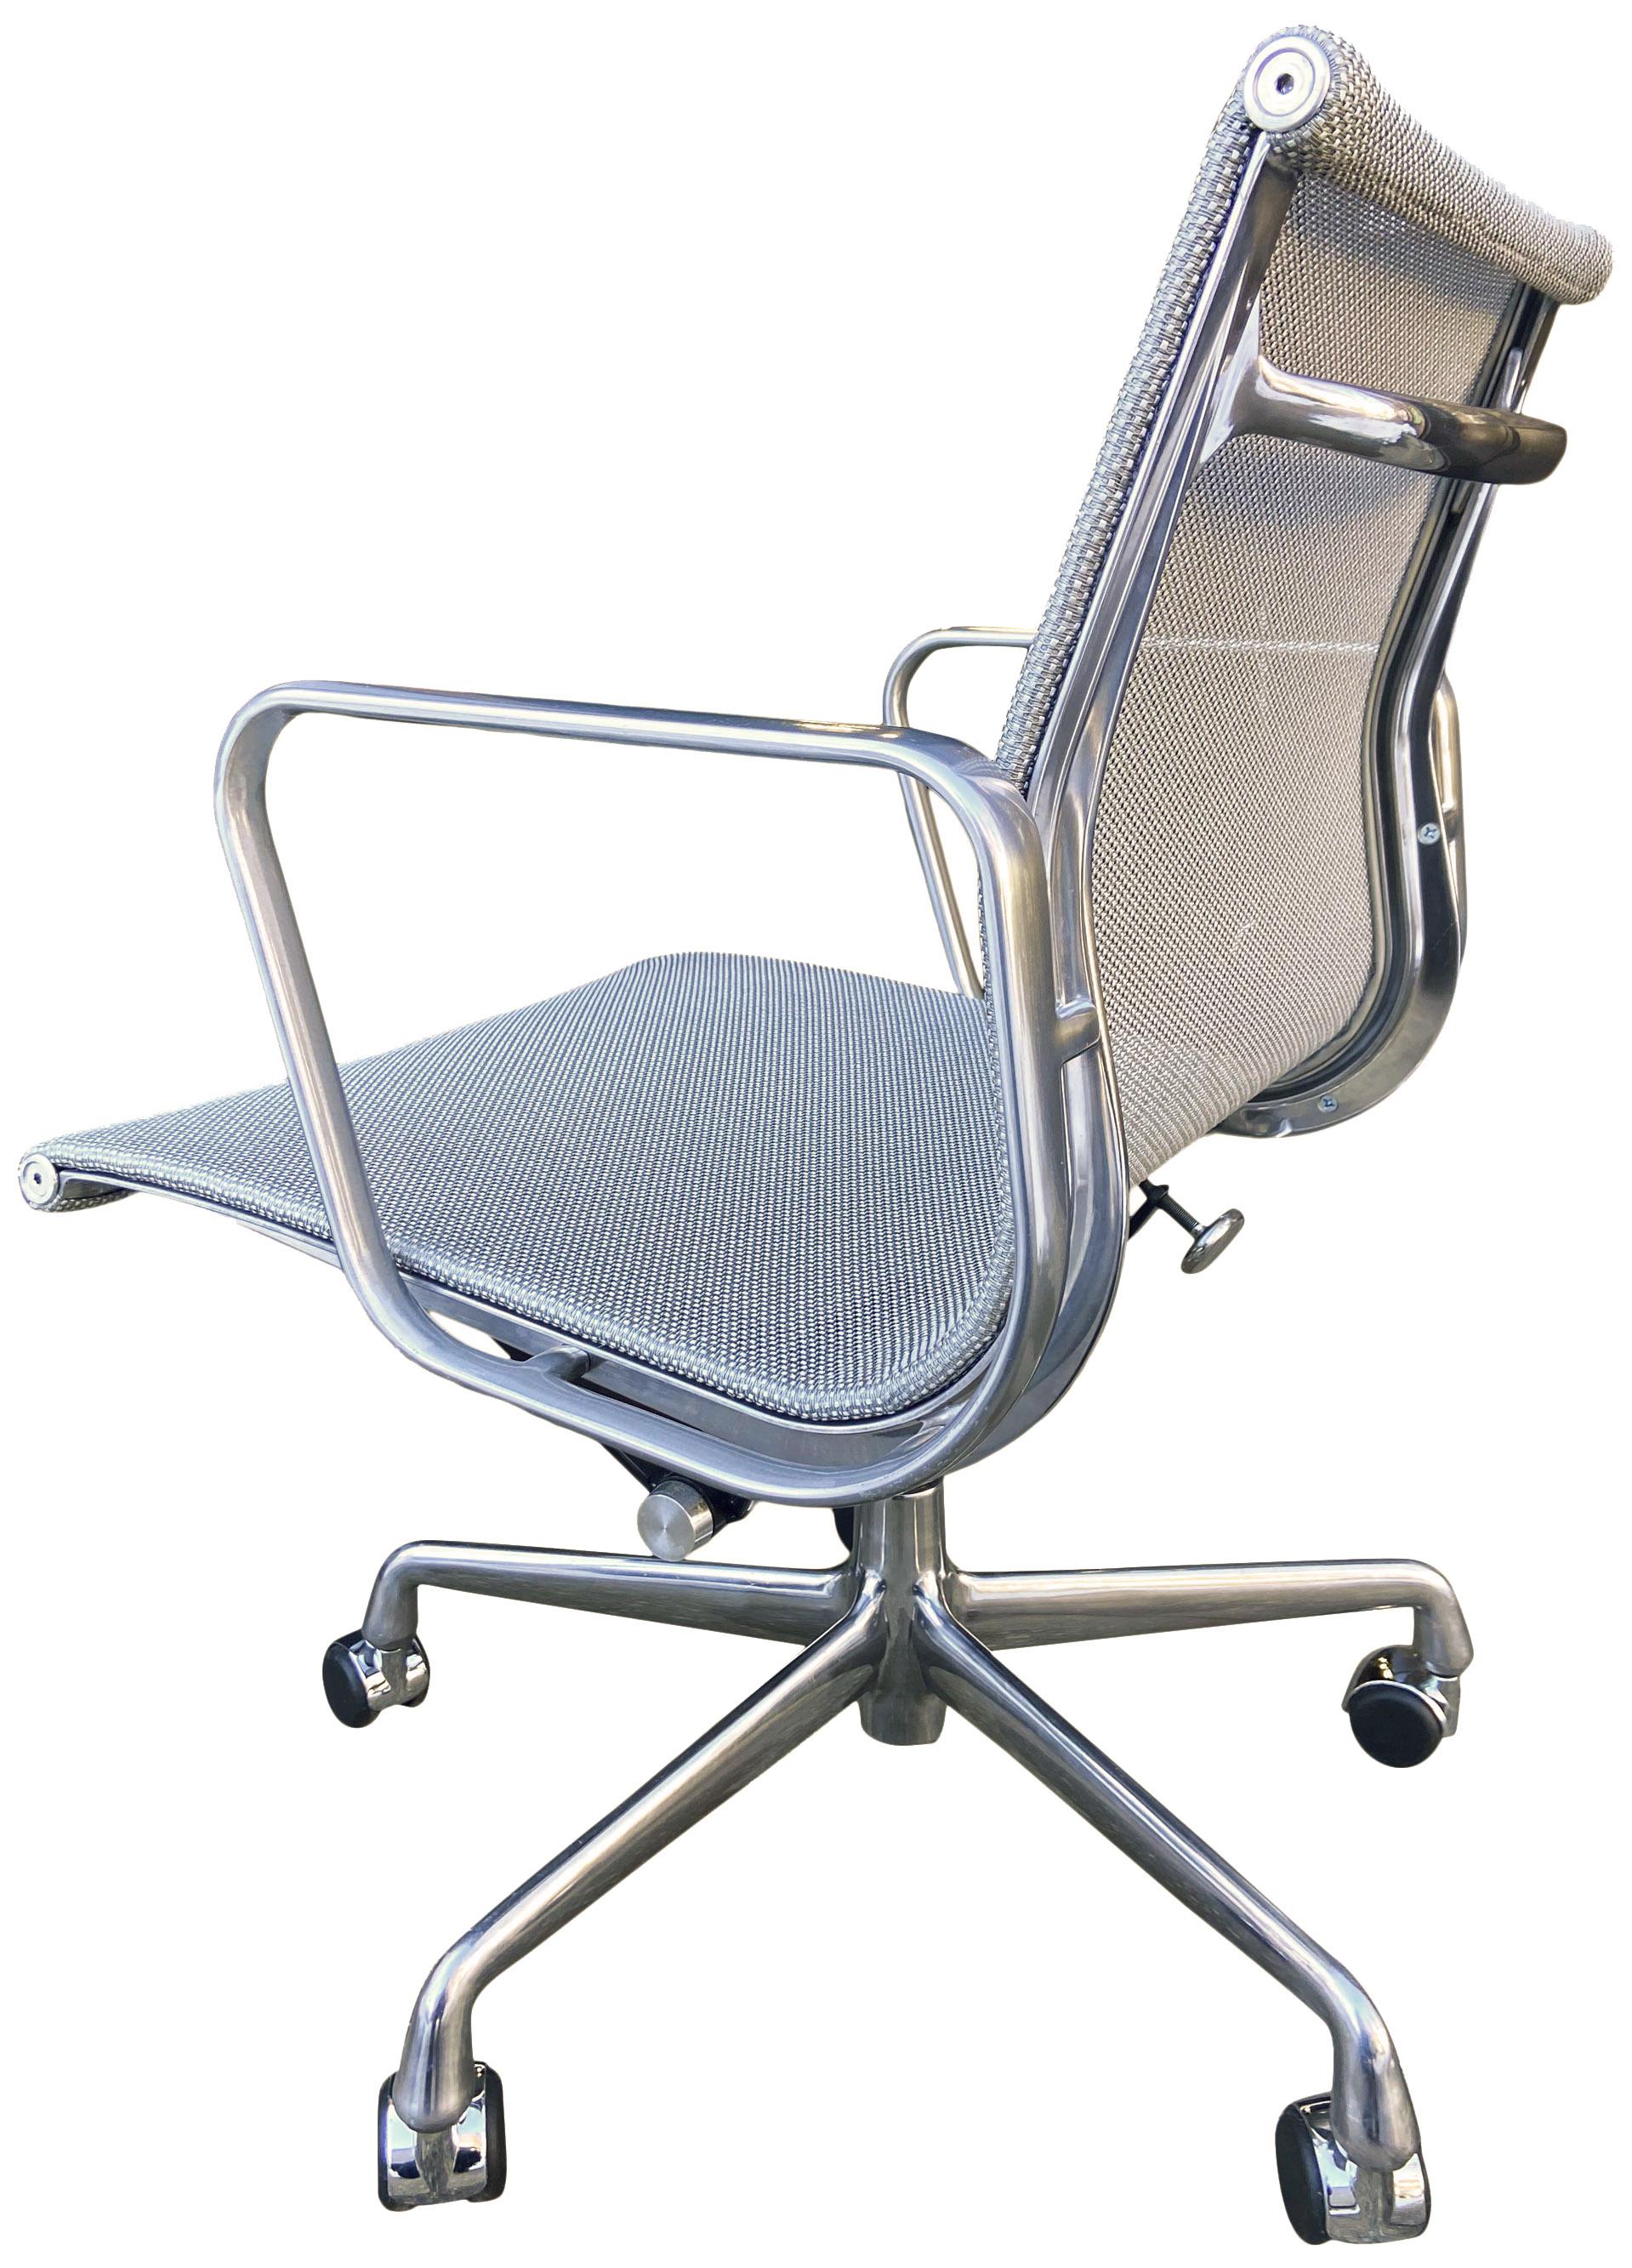 For your consideration are up to 24 Gorgeous and sleek Aluminum Group chairs in quartz / silver / gray mesh designed by Eames for Herman Miller. All in original condition with no rips to mesh. Some light scuffs to arms that have been polished out.